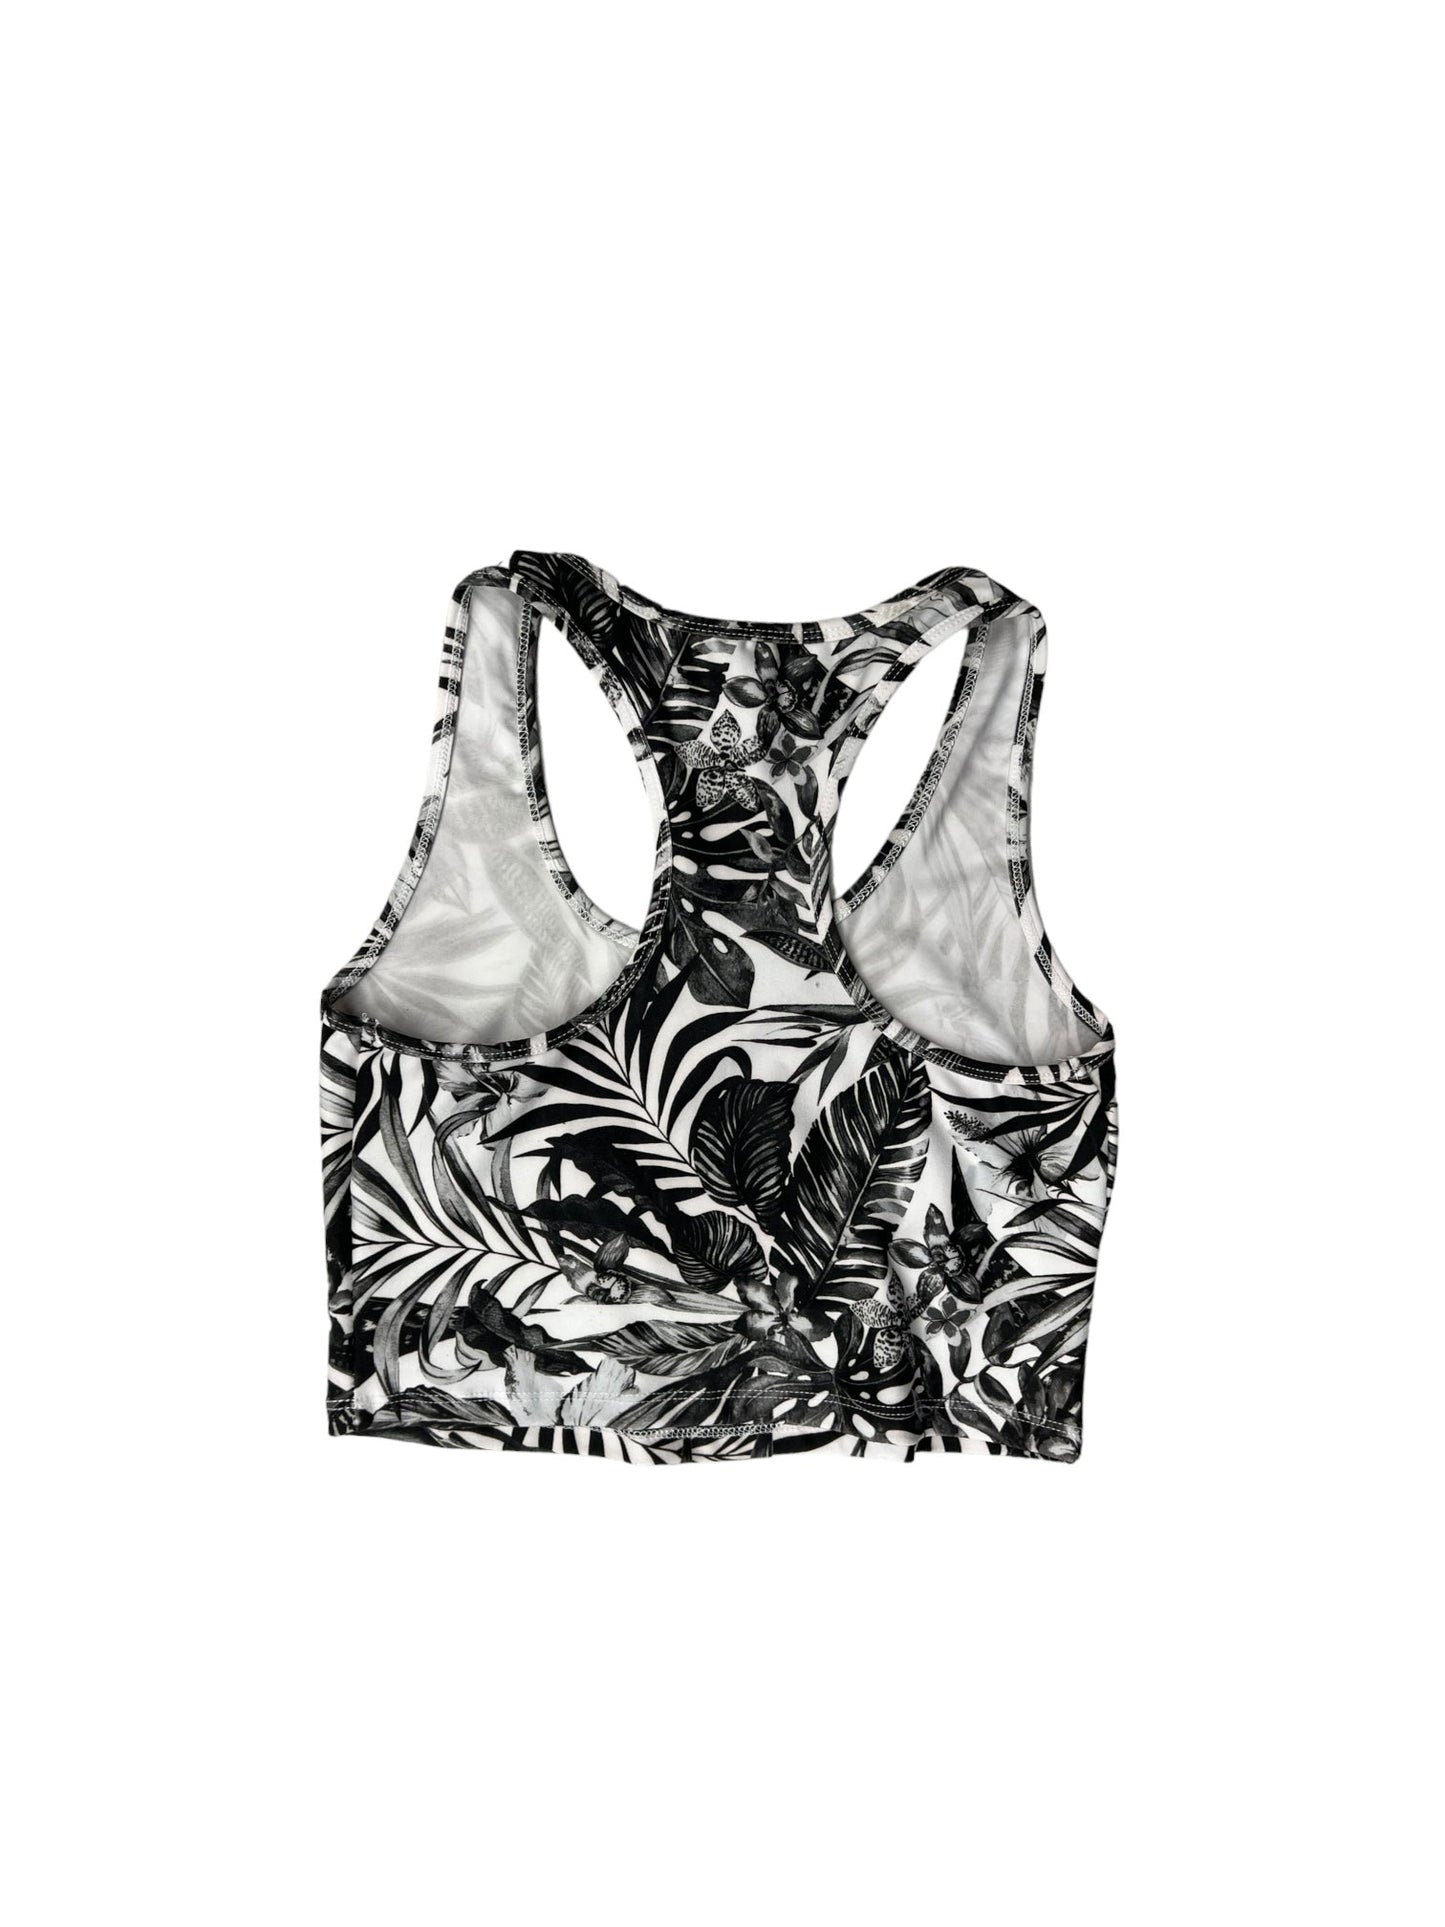 Athletic Tank Top By EVOLUTION AND CREATIONSize: M